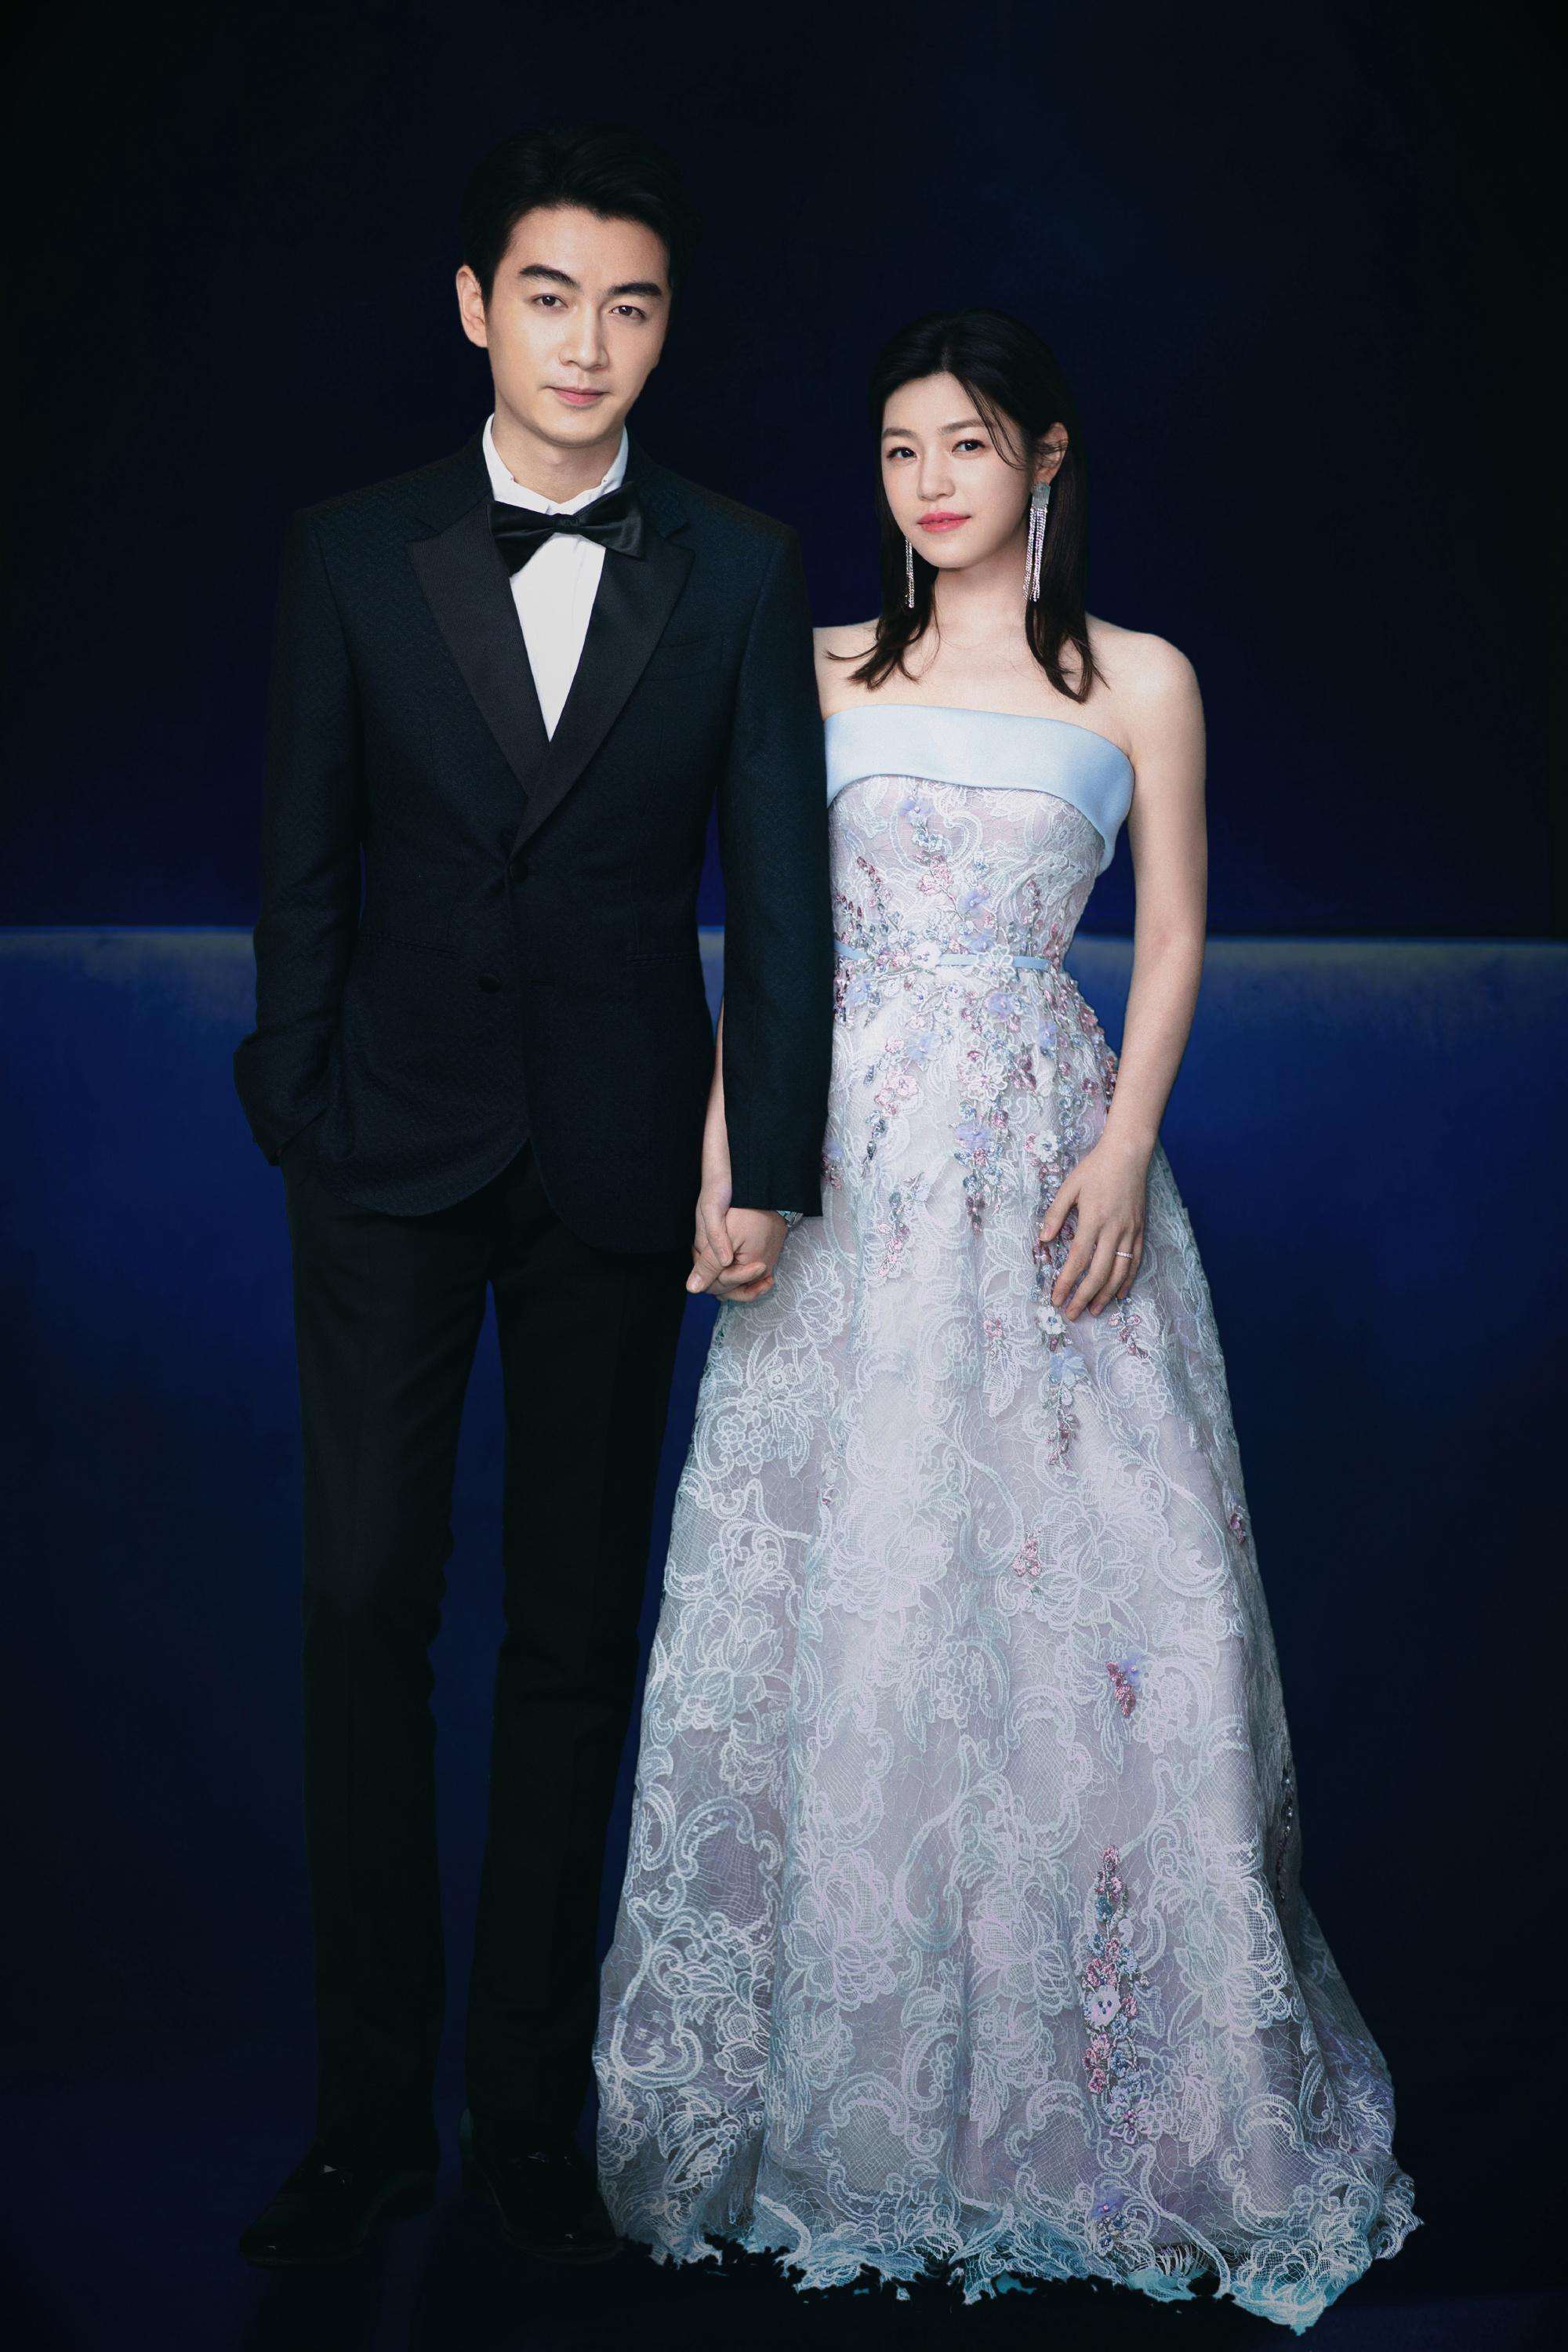 The Stars of Romance of the Condor Heroes get married | DramaPanda